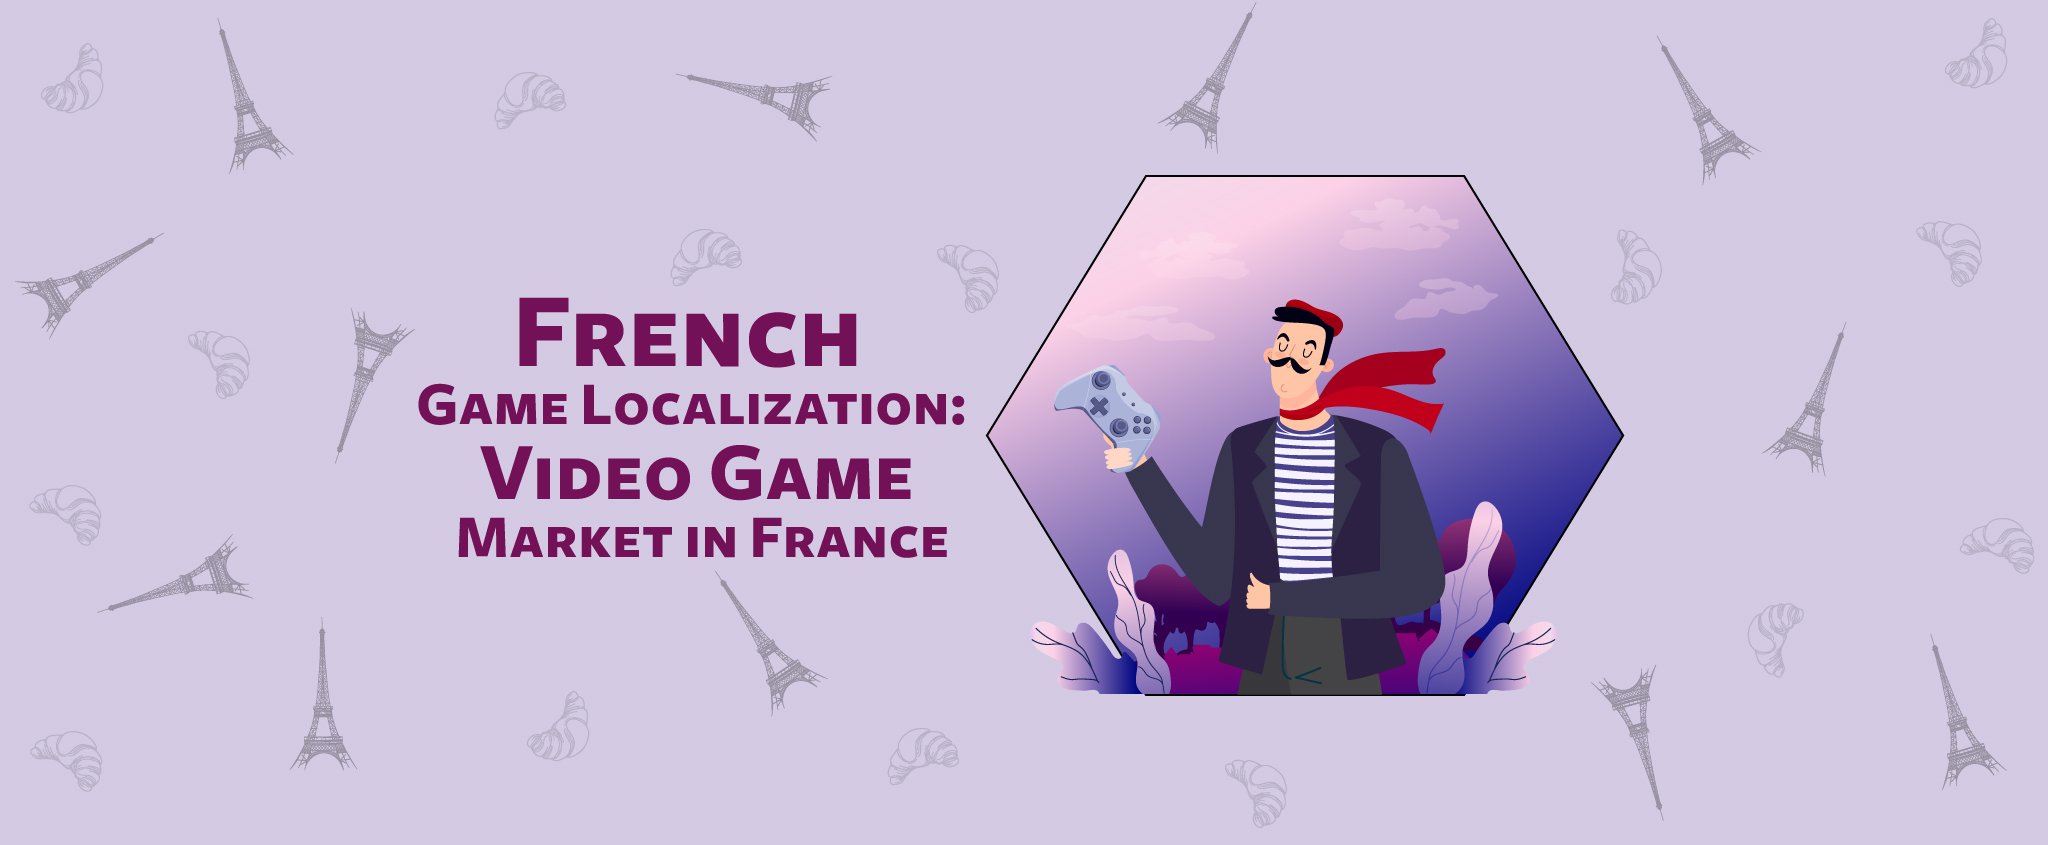 French Game Localization; Video Game Market in France